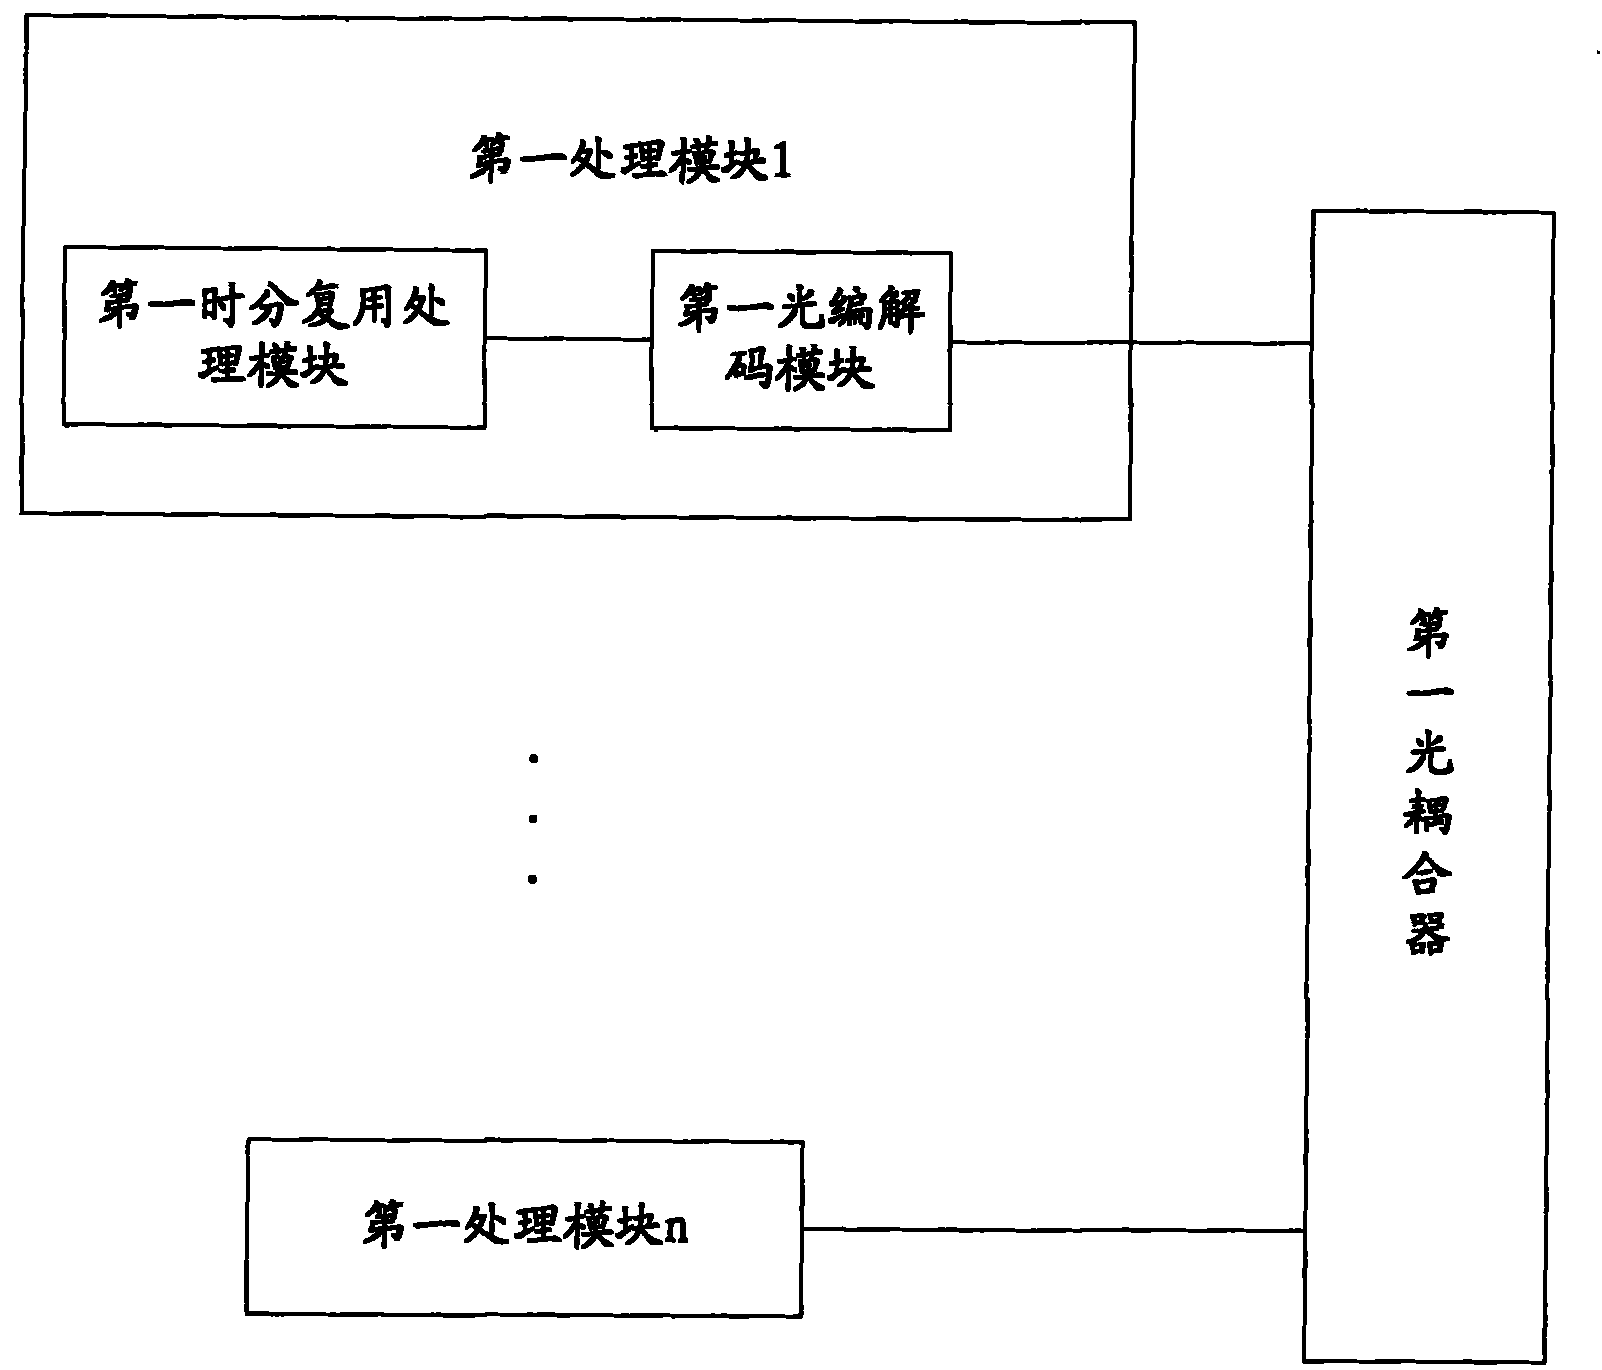 Optical network system, optical line terminal, optical network unit and optical distribution network device